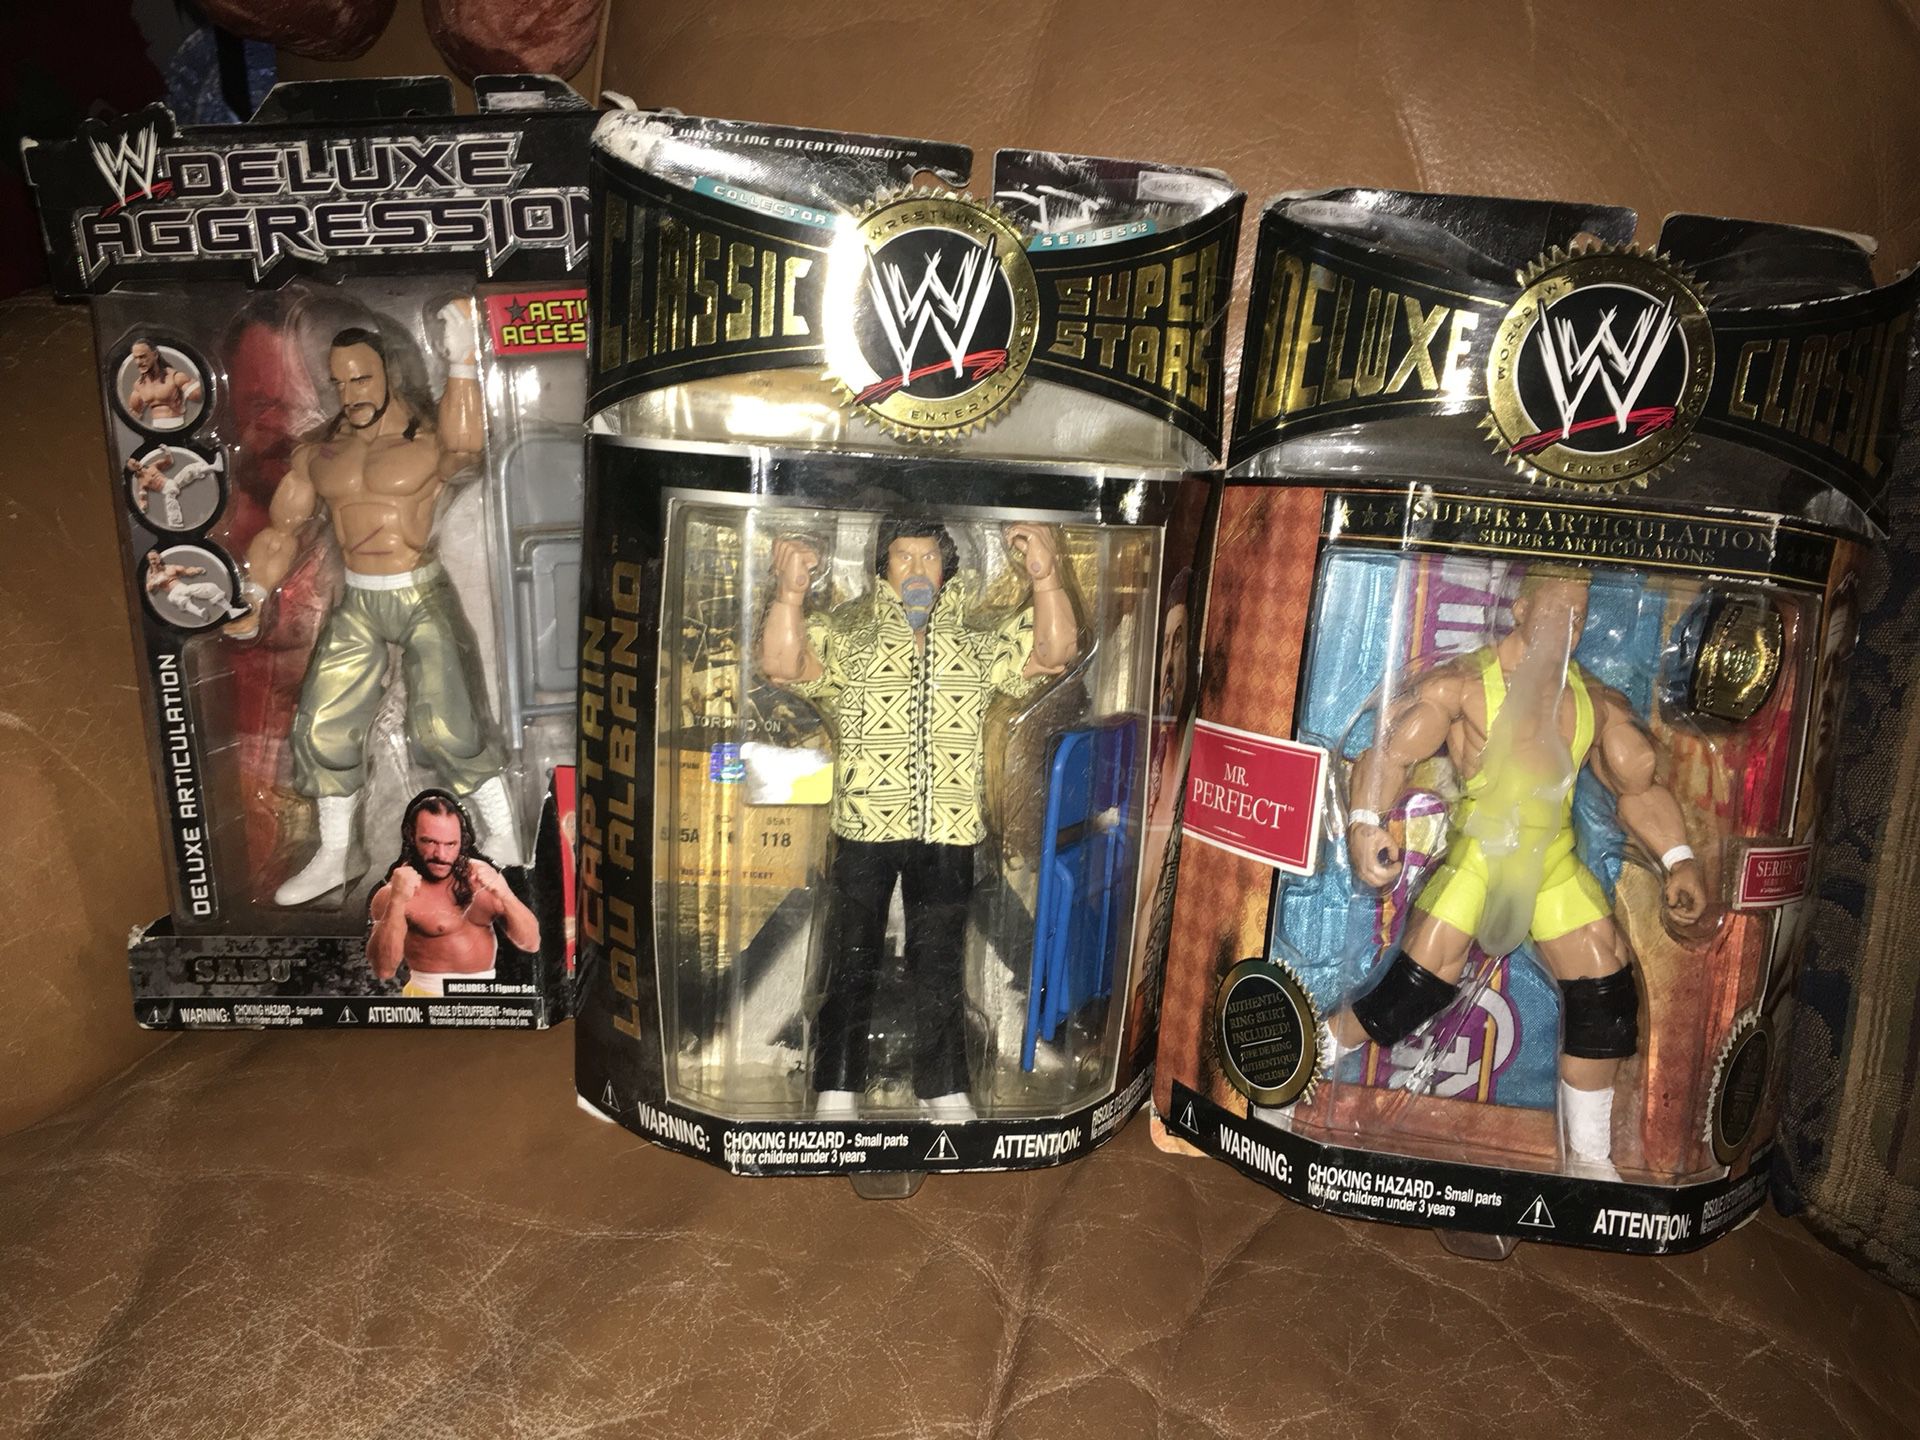 Wrestling collector fan? 3 brand New WWW Wrestling action figures all for $20